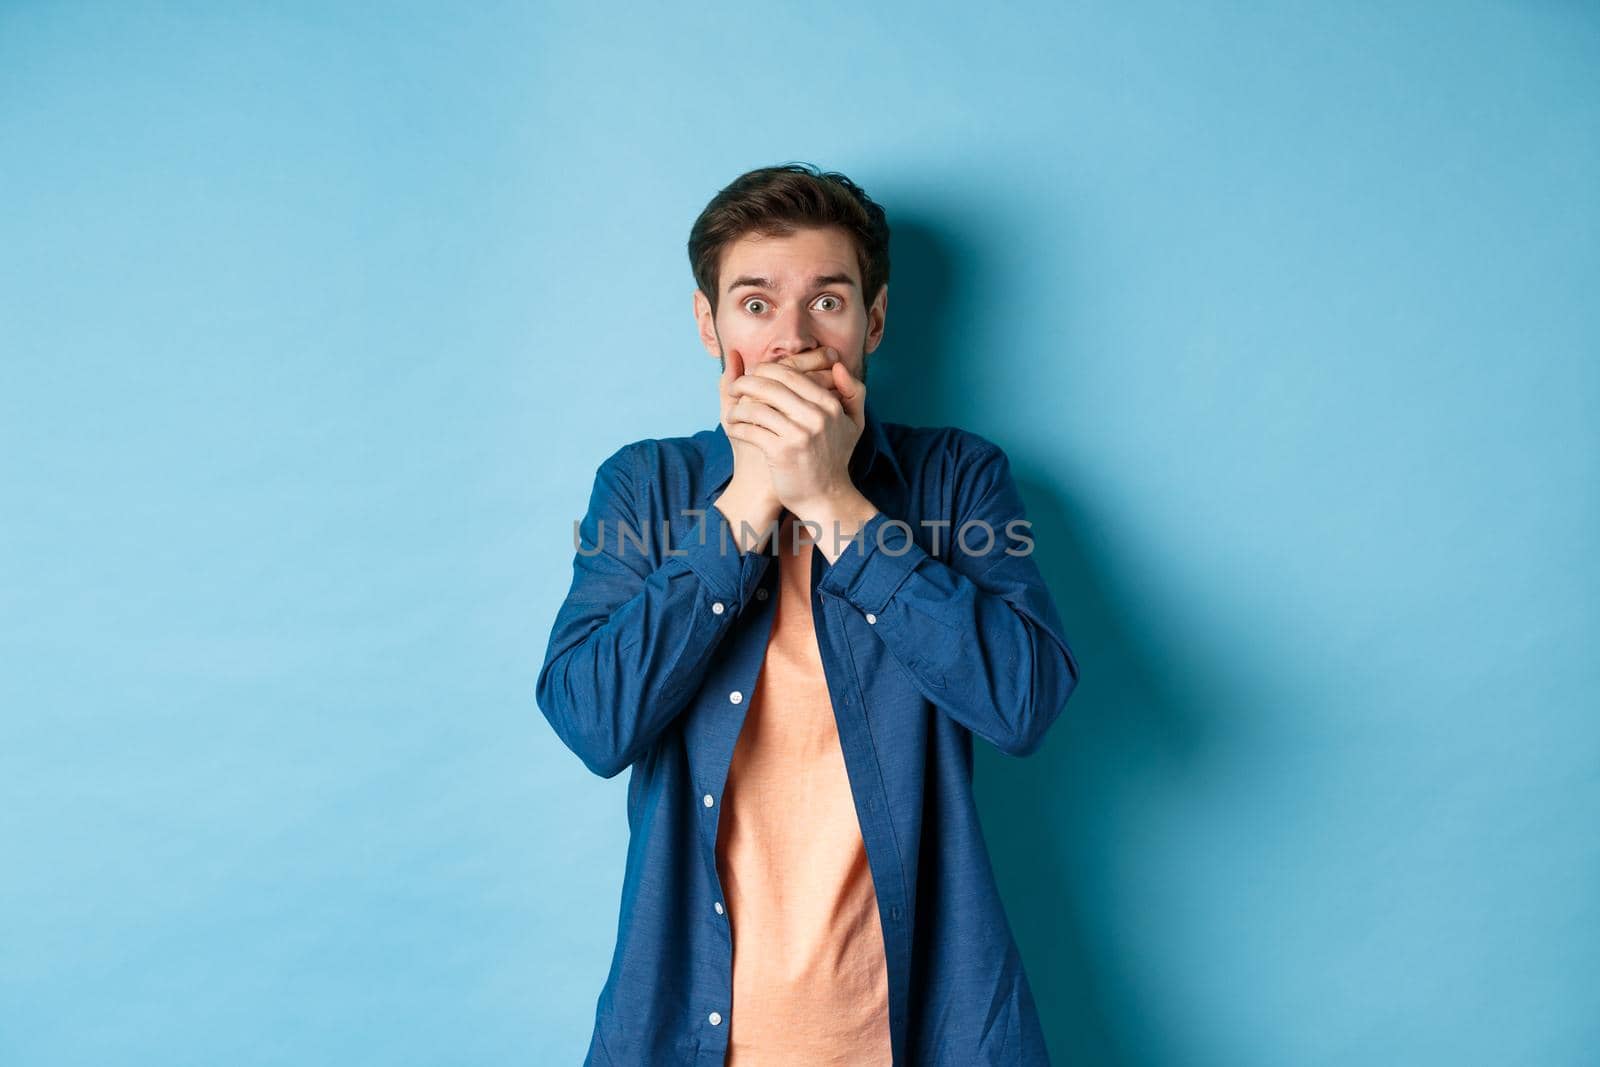 Shocked man covering mouth and gasping ambushed, witness something scary, standing on blue background.